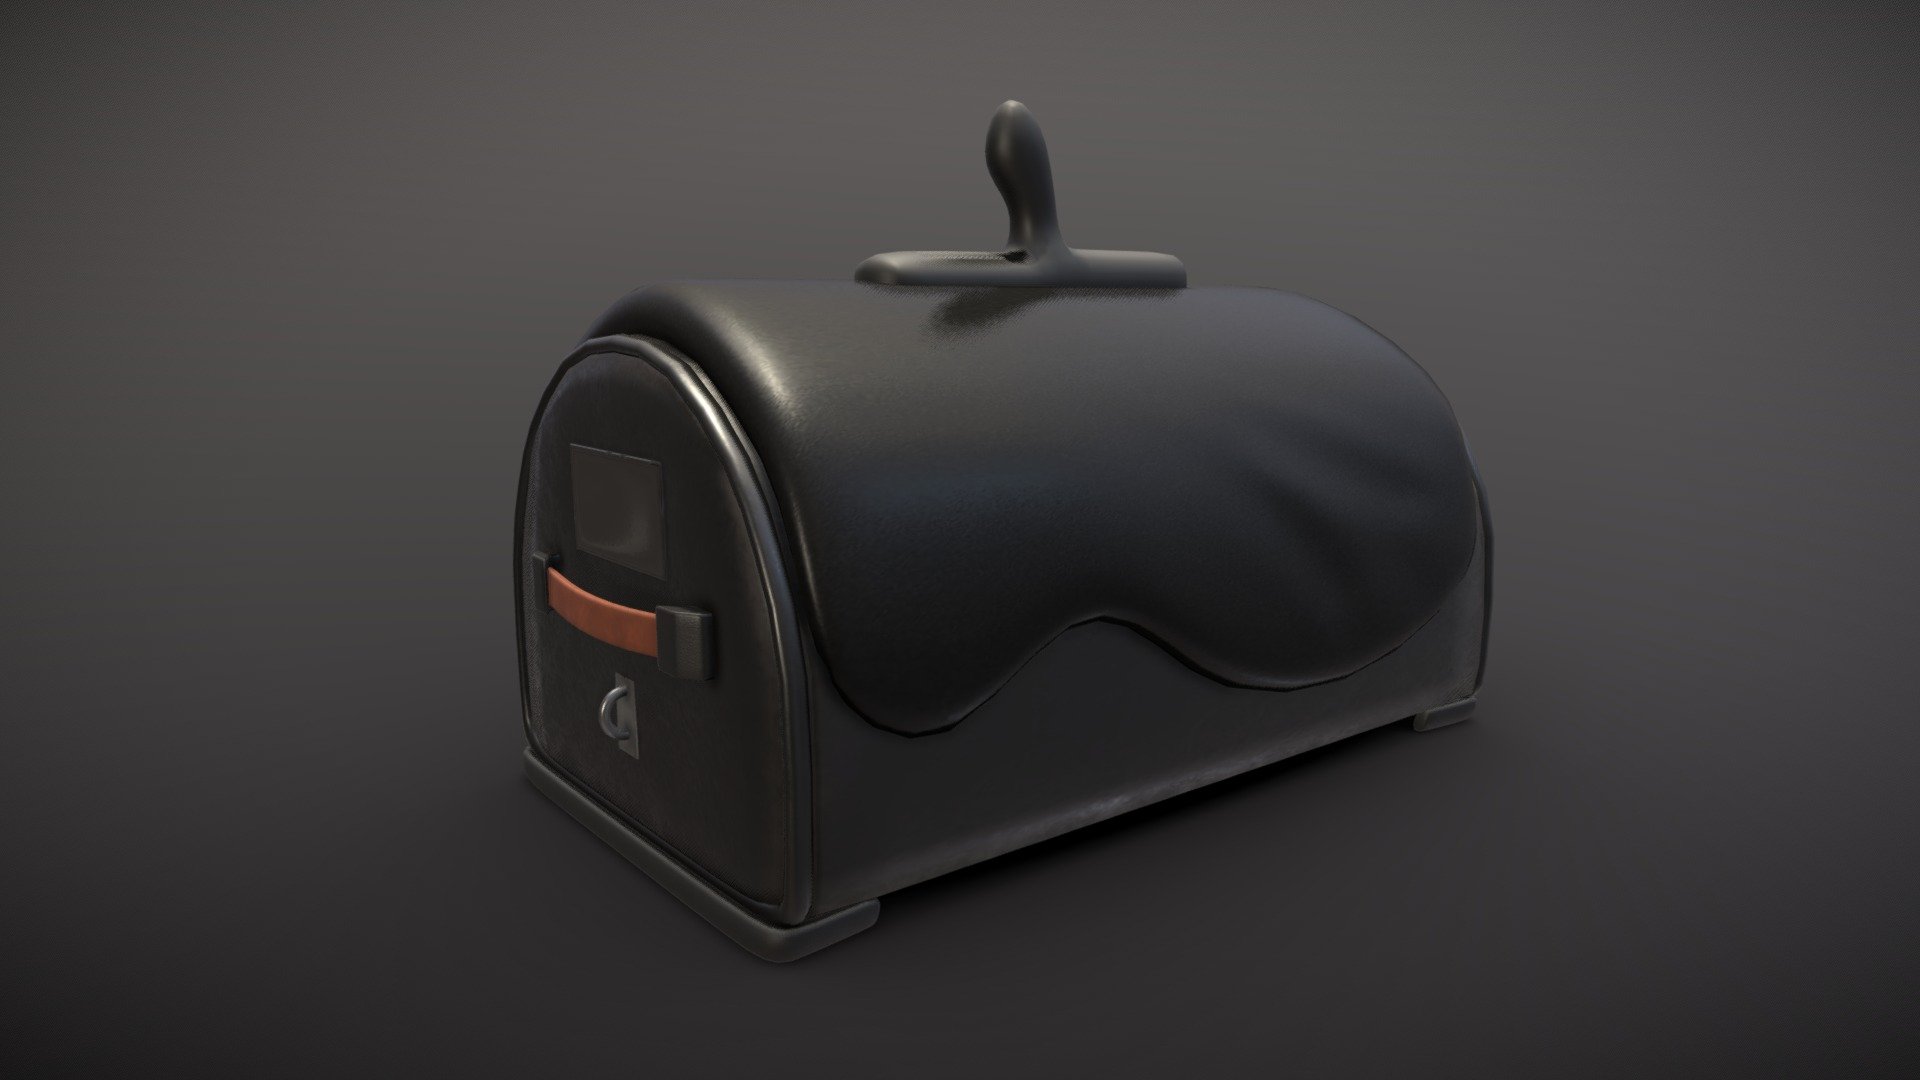 Classic Sybian

Made in Blender and textured in Substance Painter

Older one than Cyber Sybian, updating my collection 3d model